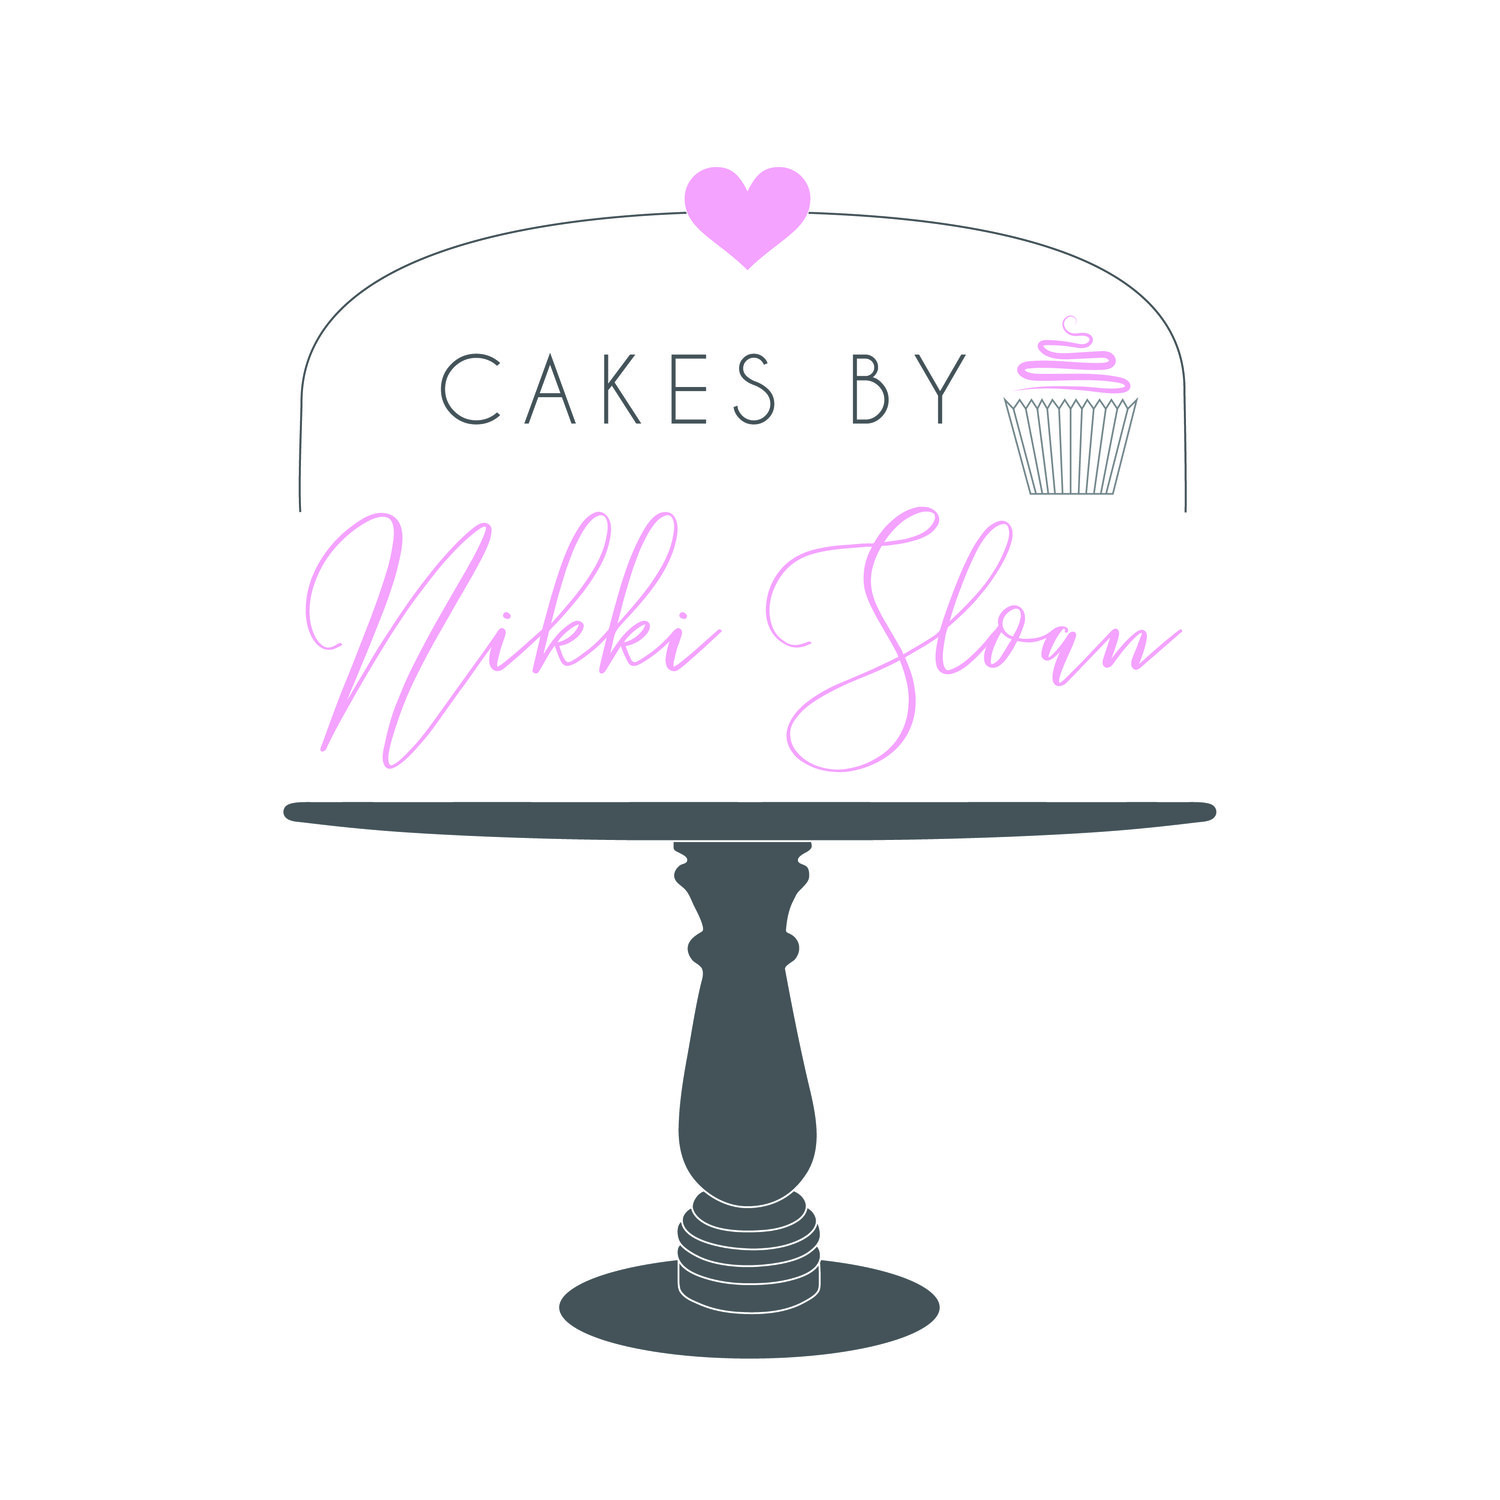 Cakes by Nikki Sloan